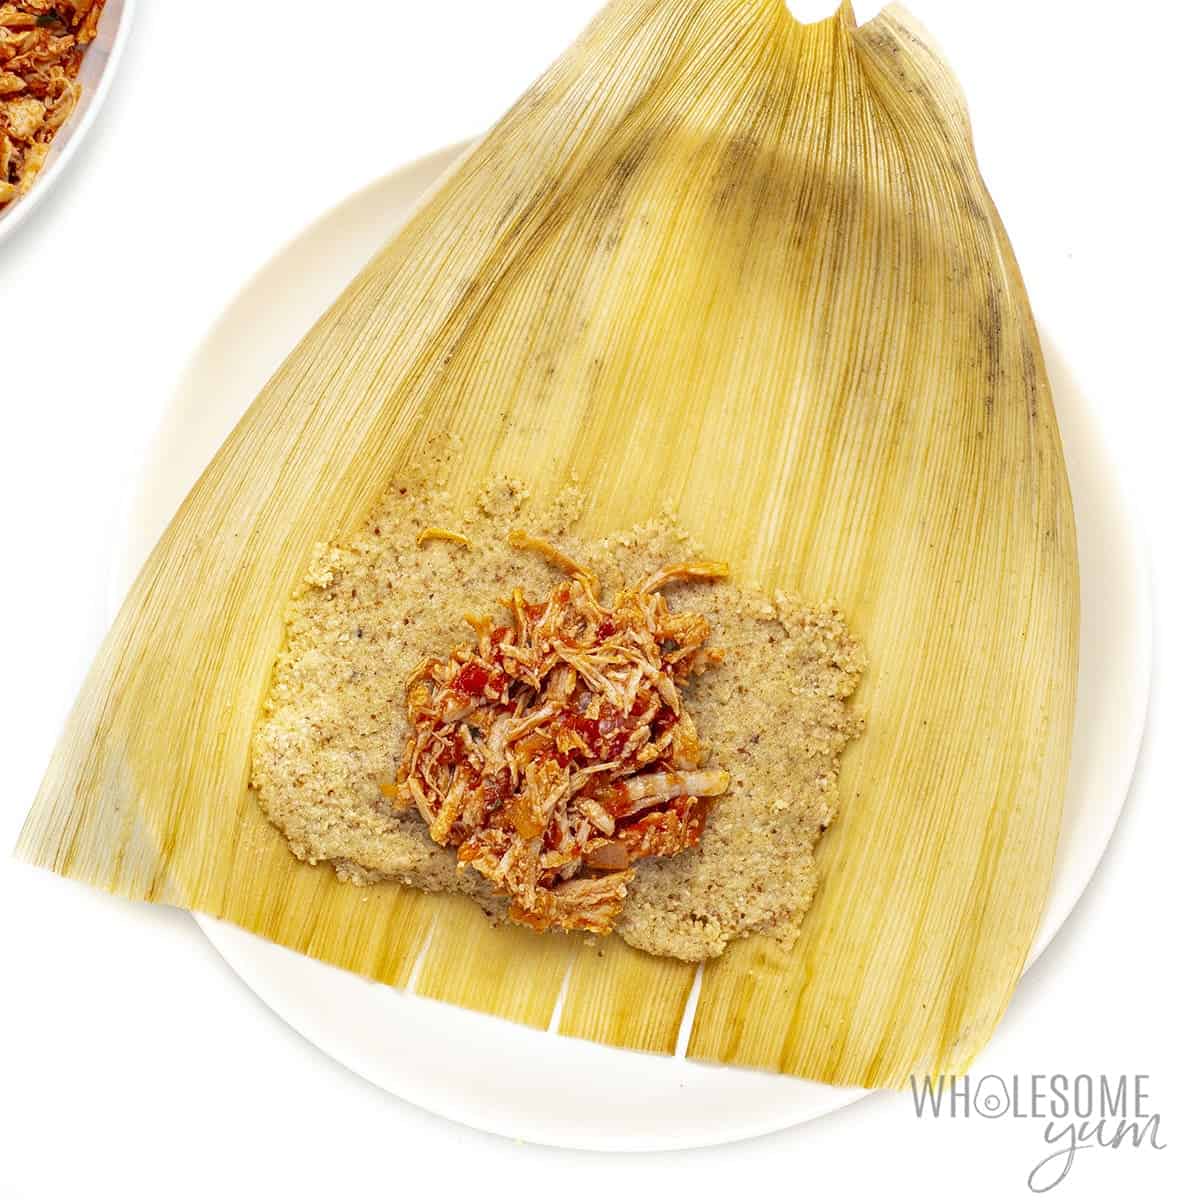 Keto tamale with chicken filling on corn husk.